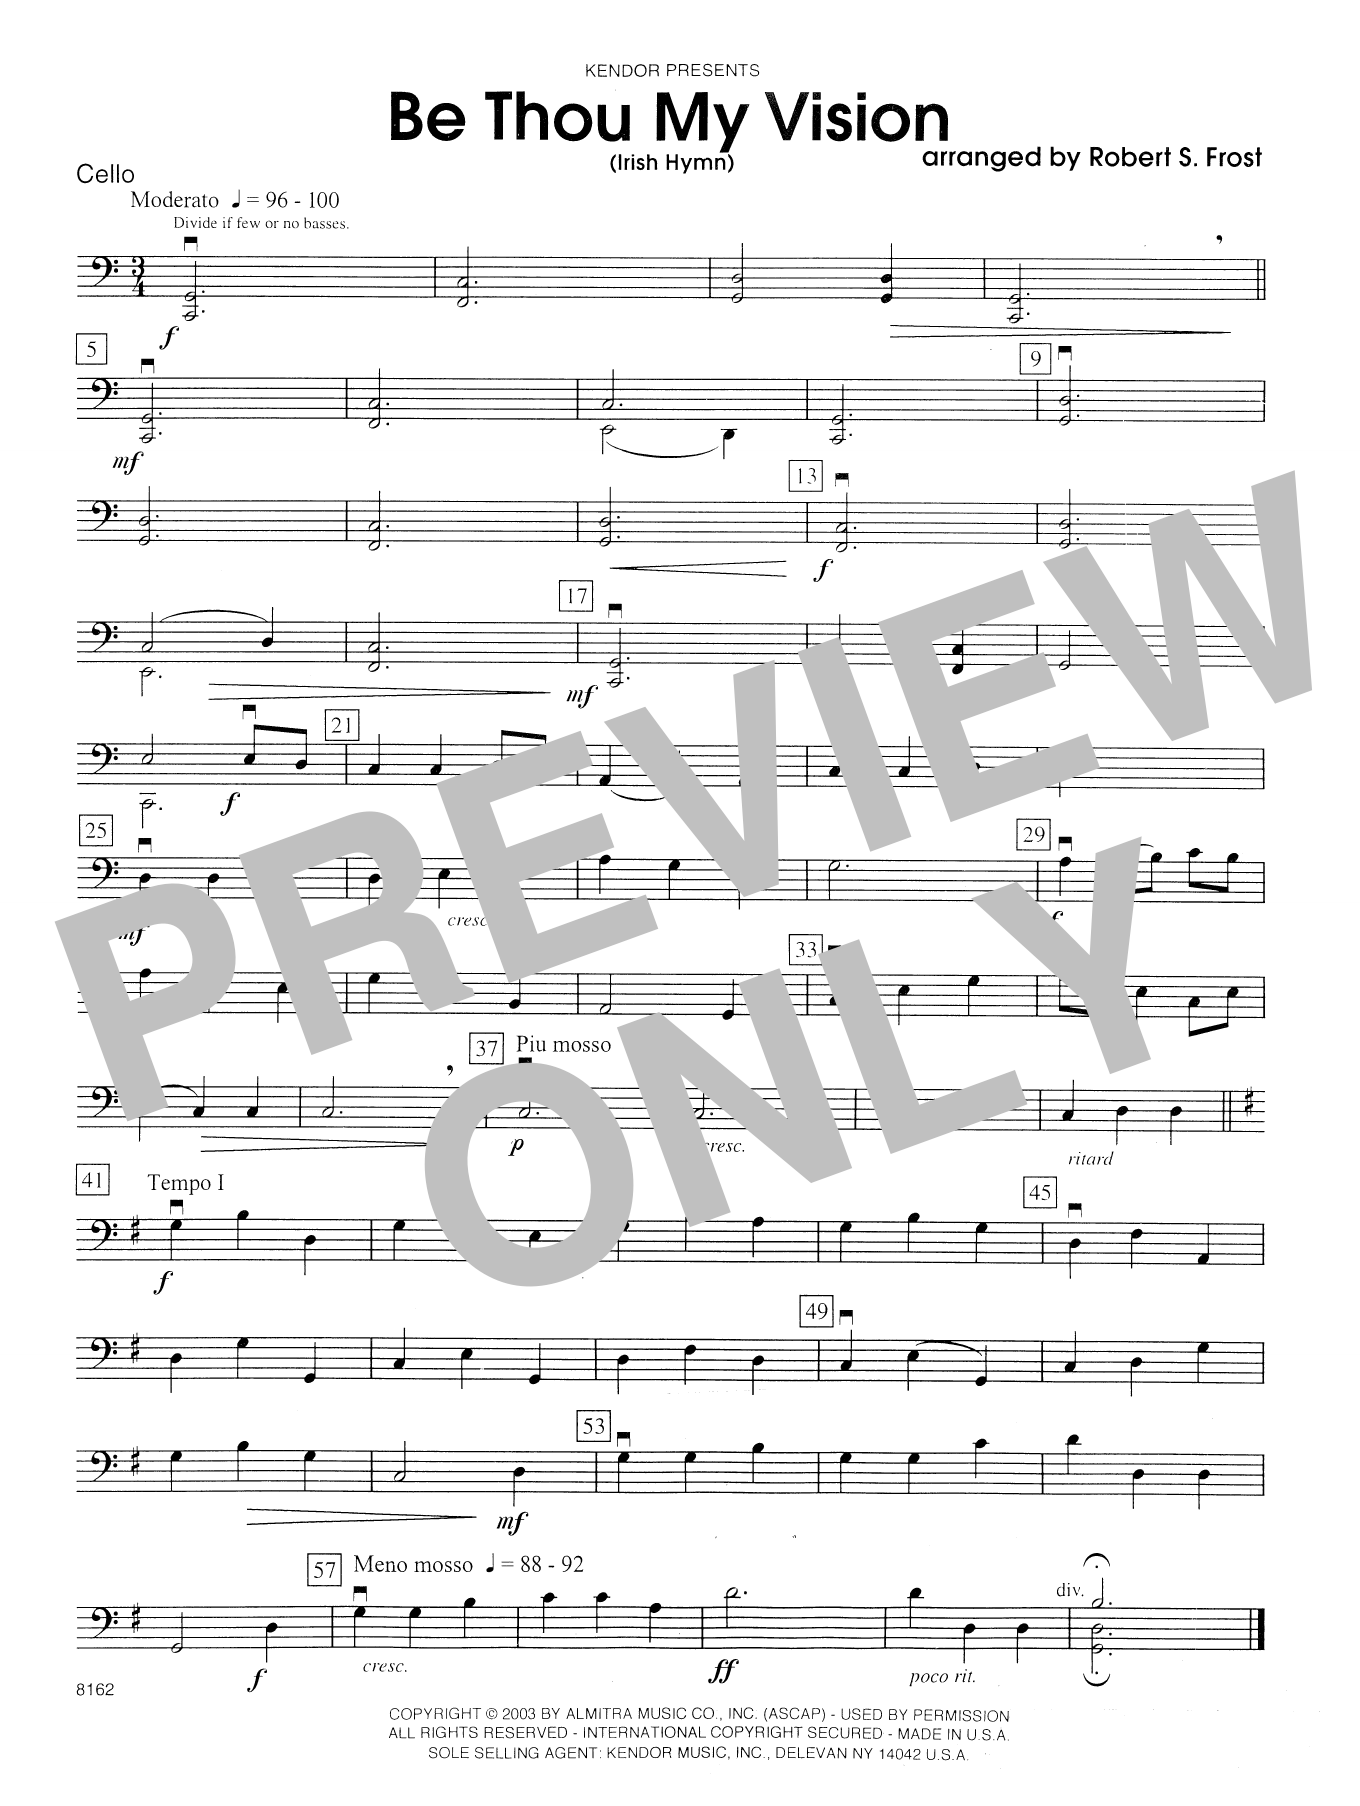 Download Robert S. Frost Be Thou My Vision (Irish Hymn) - Cello Sheet Music